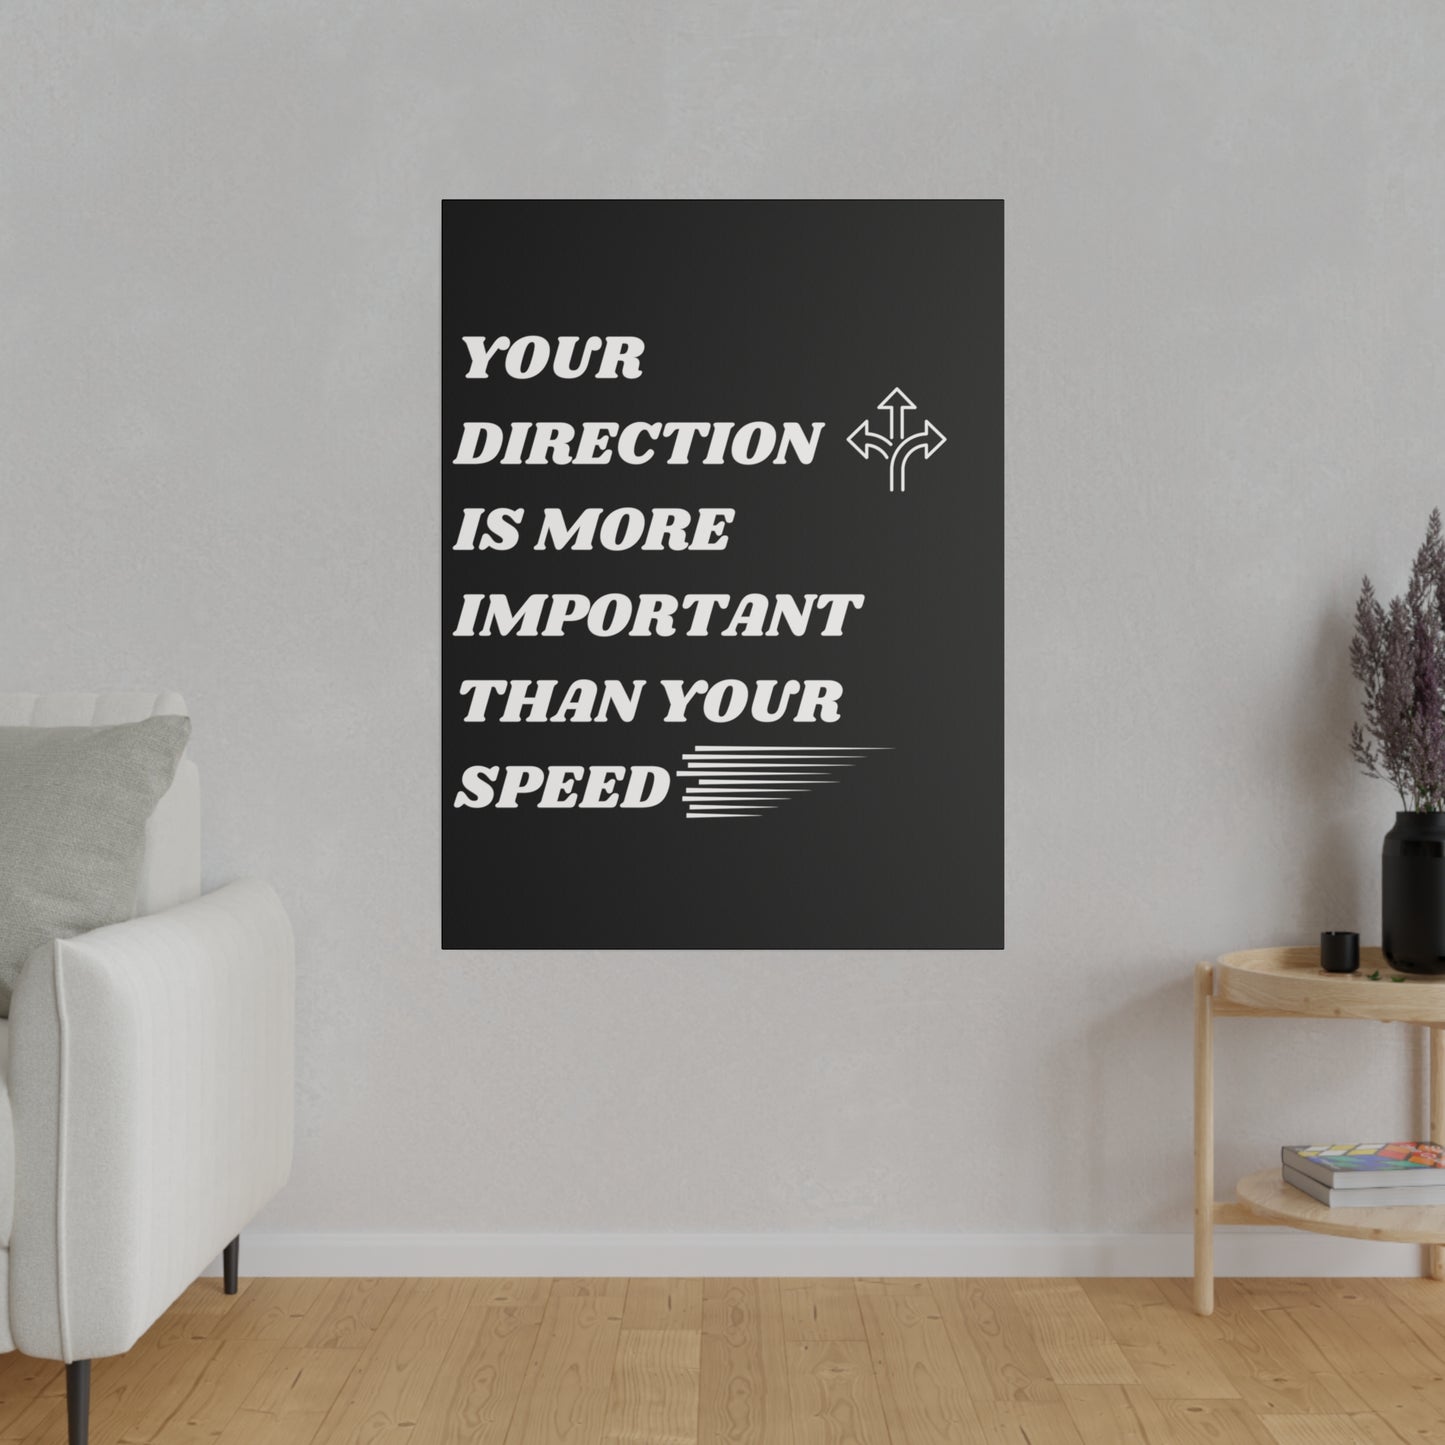 Your Direction Matte Canvas, Stretched, 0.75"